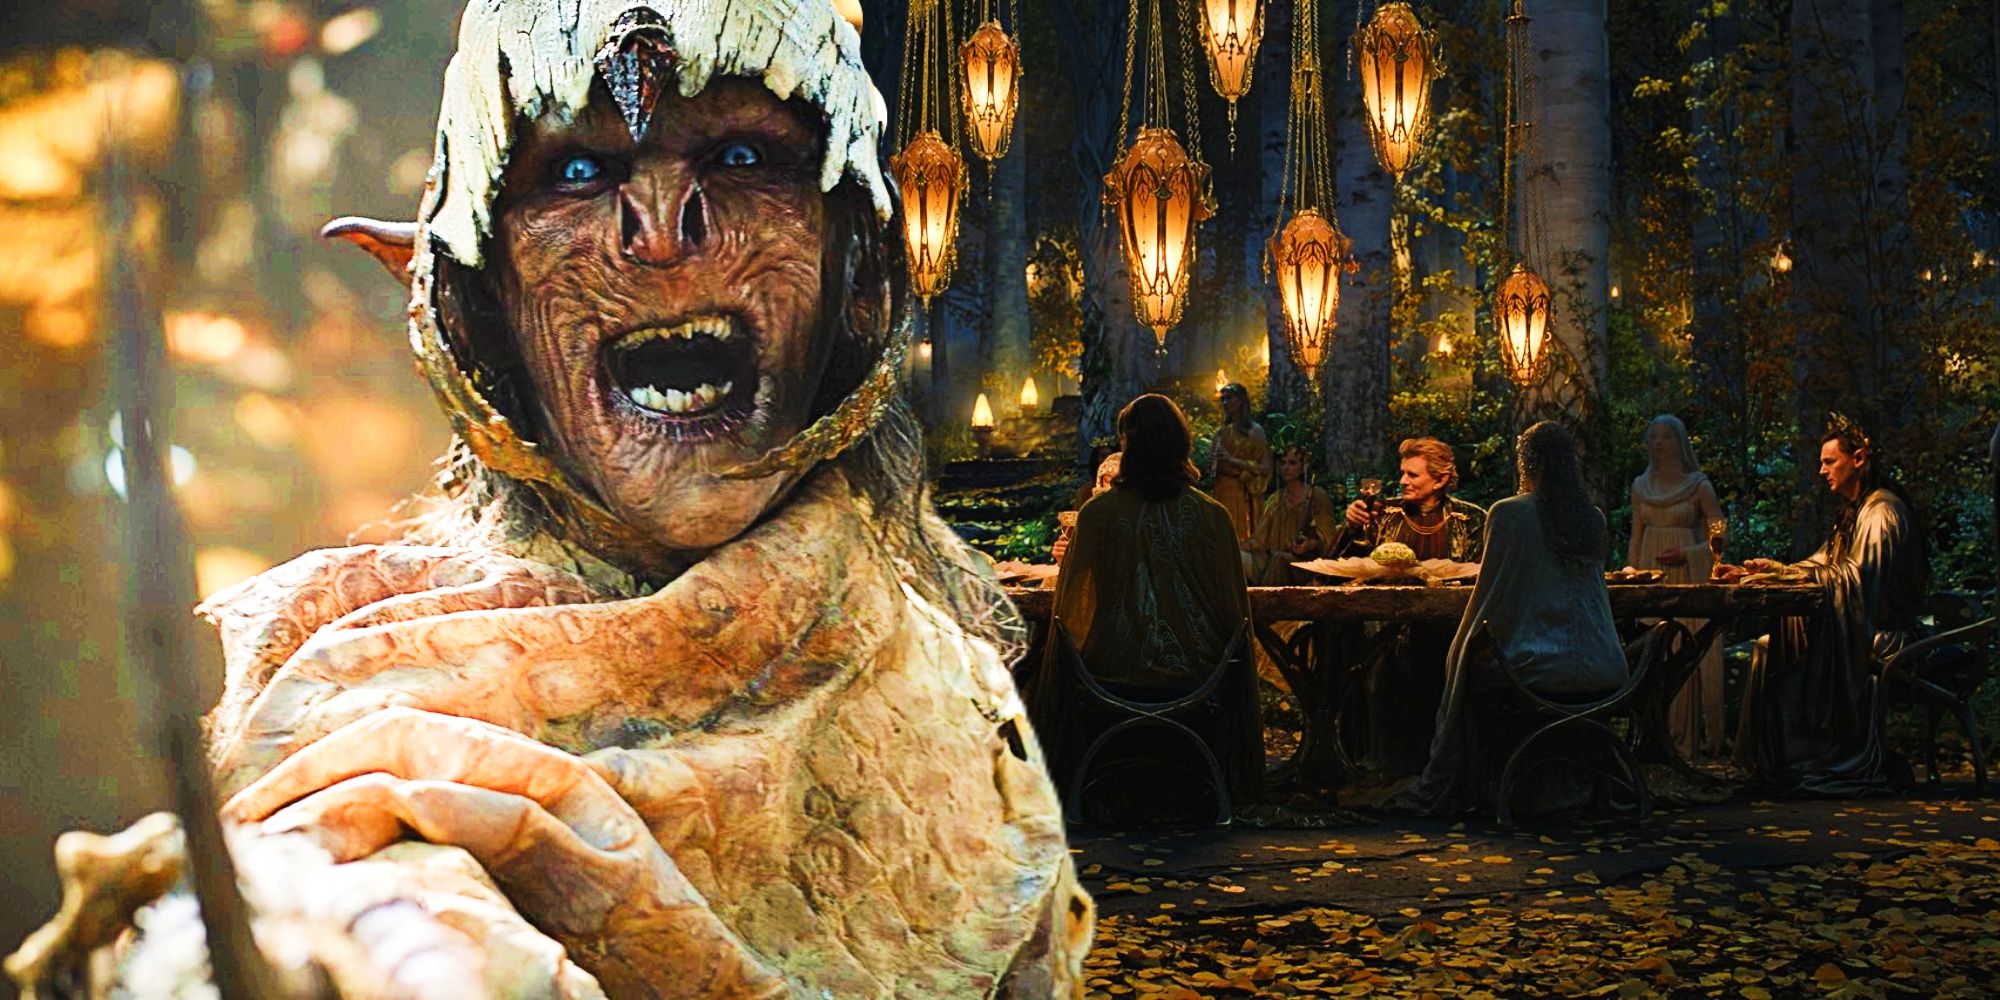 https://static1.srcdn.com/wordpress/wp-content/uploads/2022/07/An-orc-and-a-council-in-The-Lord-of-the-rings-the-rings-of-power-trailer.jpg